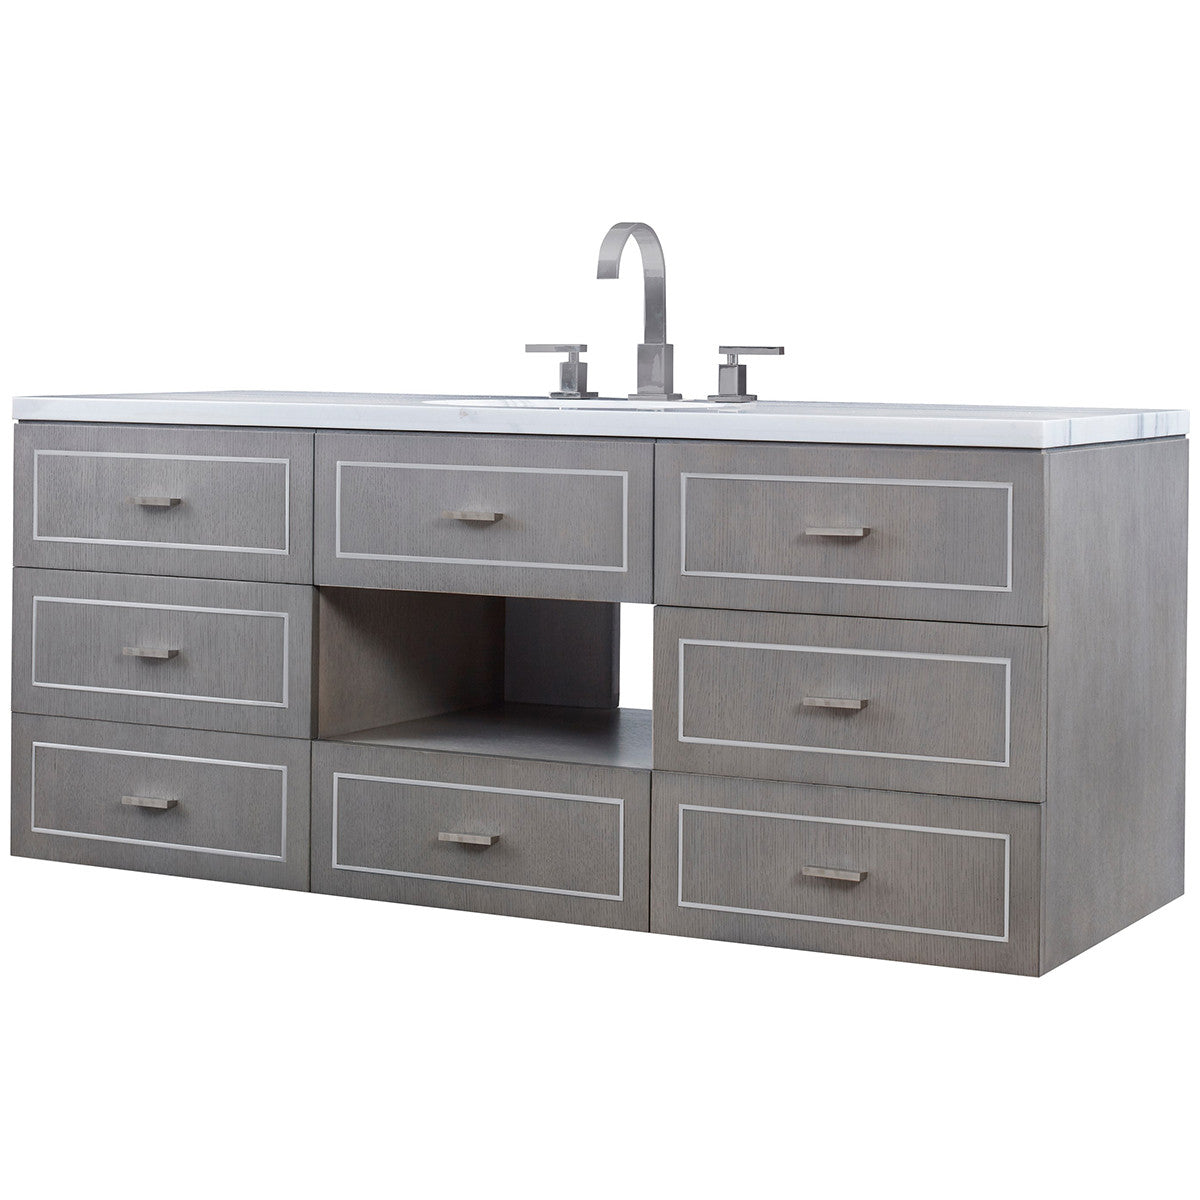 Ambella Home Albany Wall Sink Chest - Grey